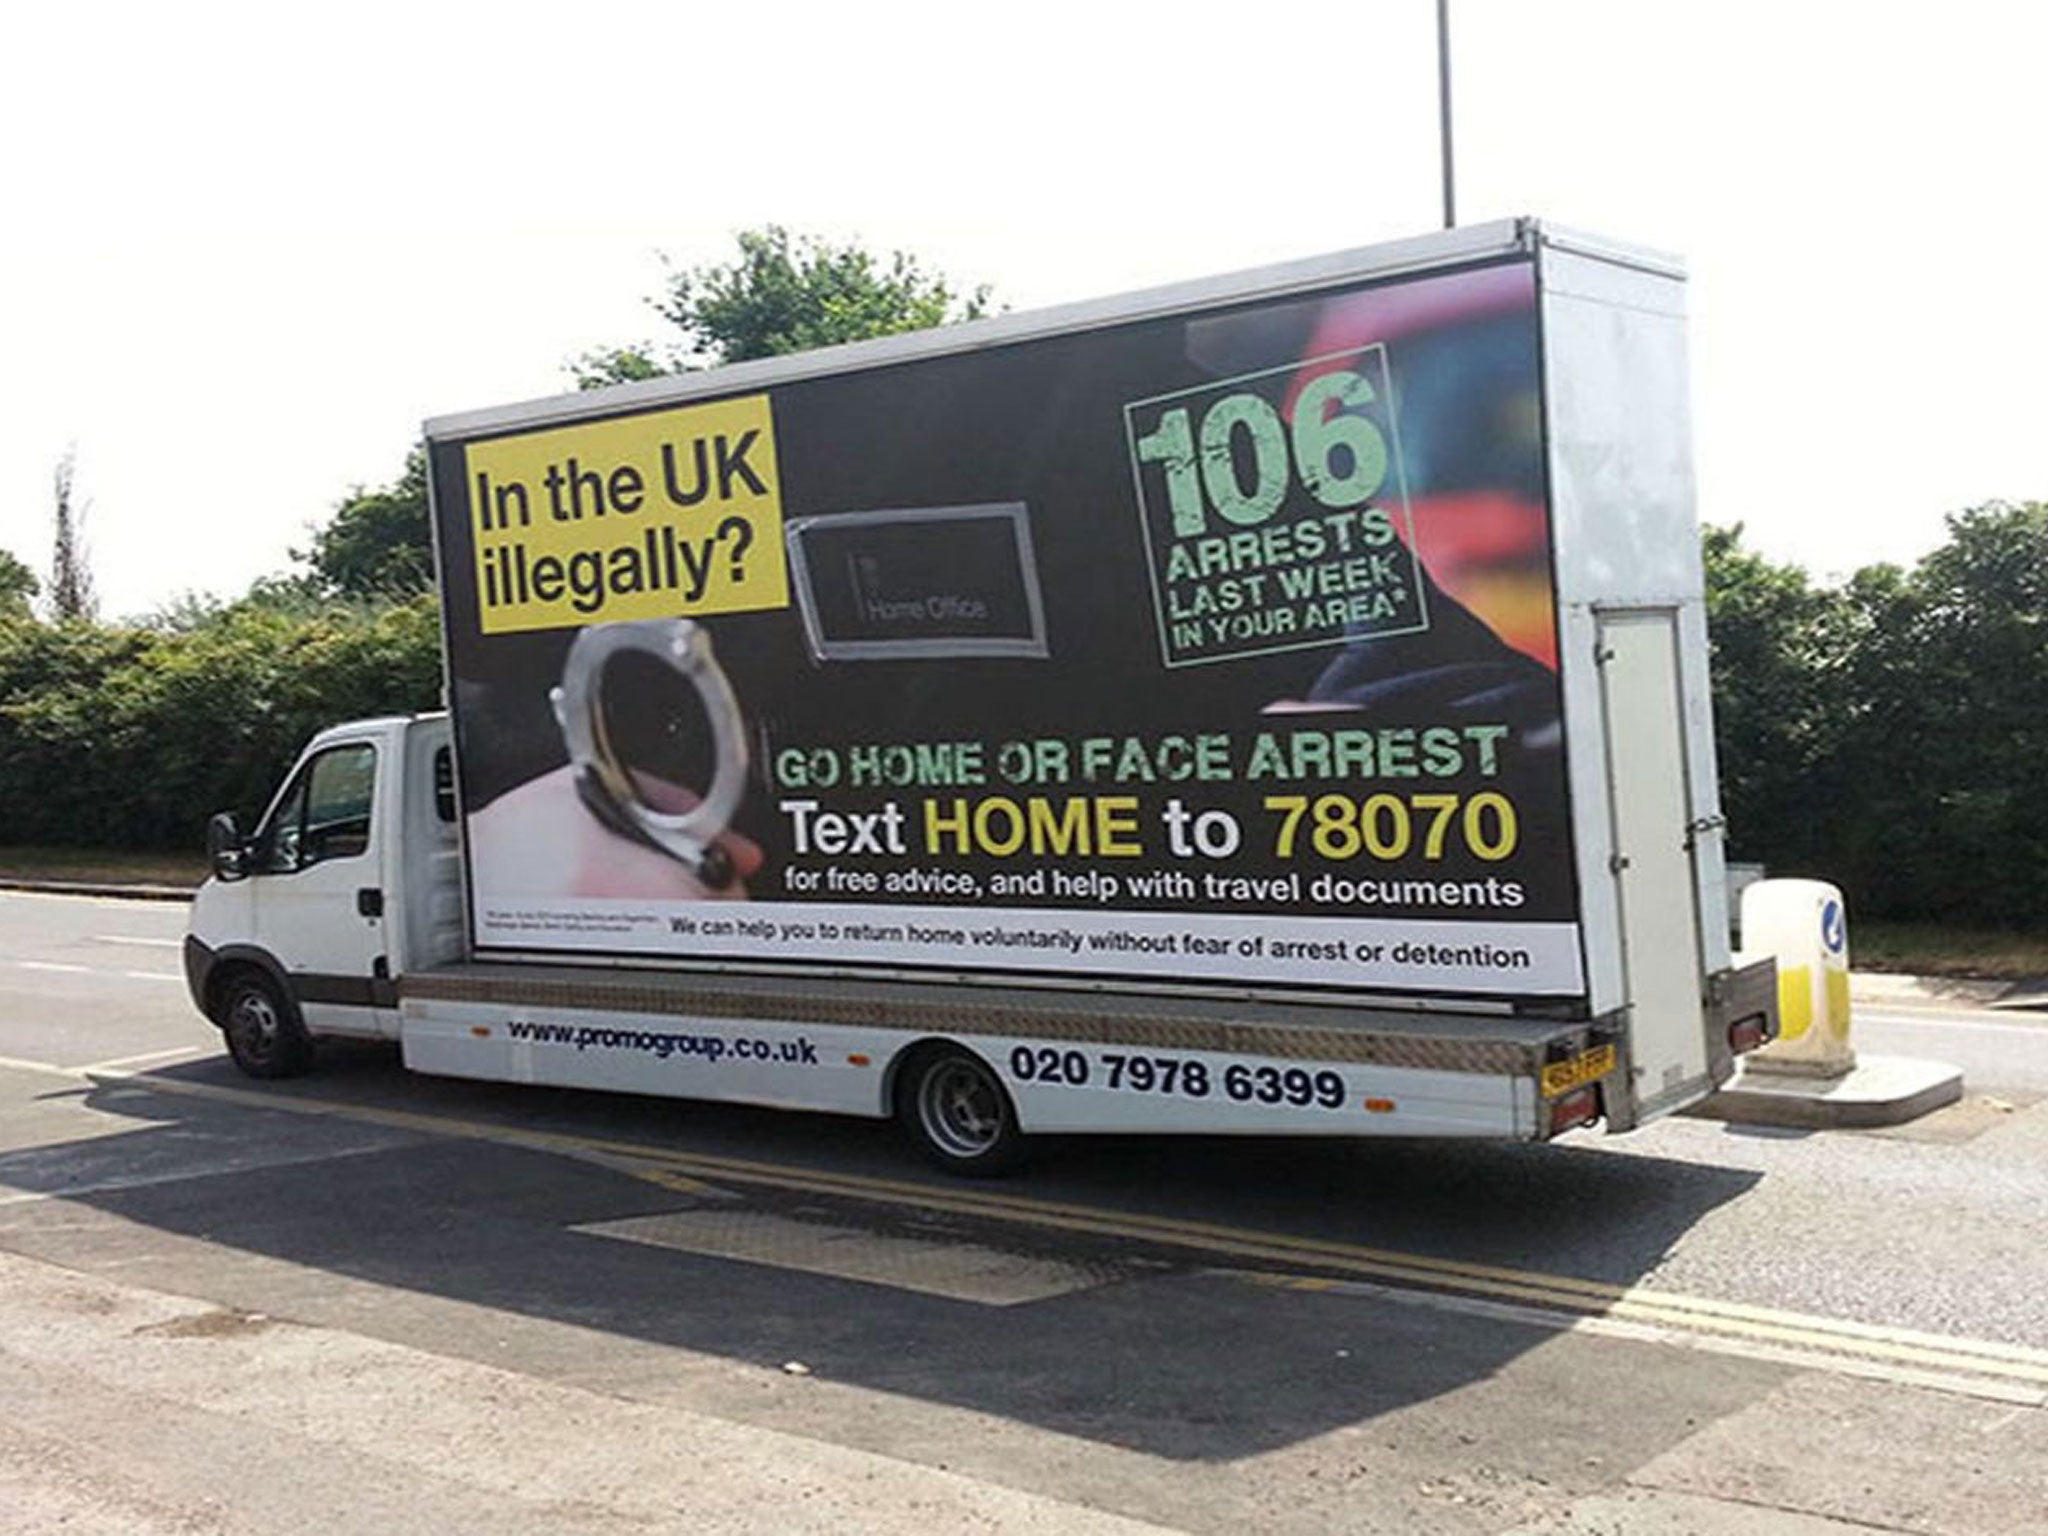 The Home Office advert scheme urged illegal immigrants to 'go home'